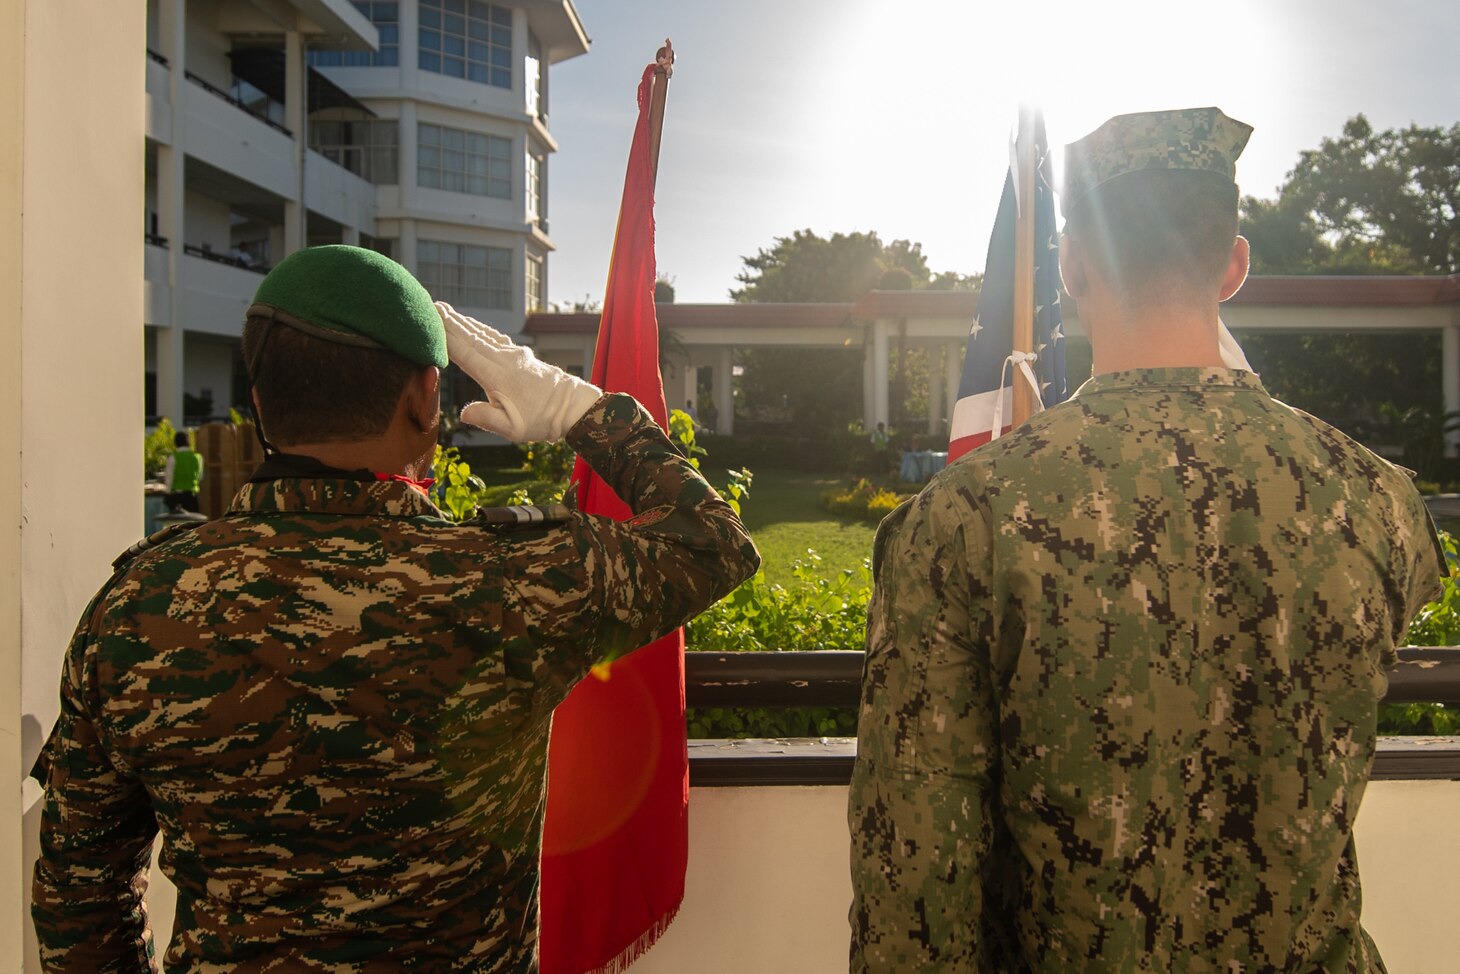 DILI, Timor-Leste (April 23, 2019) – Timor-Leste Defense Force Lt. Rufino Lima and U.S. Navy Hospital Corpsman Grayson Powell salute their respective ensigns during the Pacific Partnership 2019 opening ceremony for Timor-Leste. Pacific Partnership, now in its 14th iteration, is the largest annual multinational humanitarian assistance and disaster relief preparedness mission conducted in the Indo-Pacific. Each year the mission team works collectively with host and partner nations to enhance regional interoperability and disaster response capabilities, increase security and stability in the region, and foster new and enduring friendships in the Indo-Pacific.